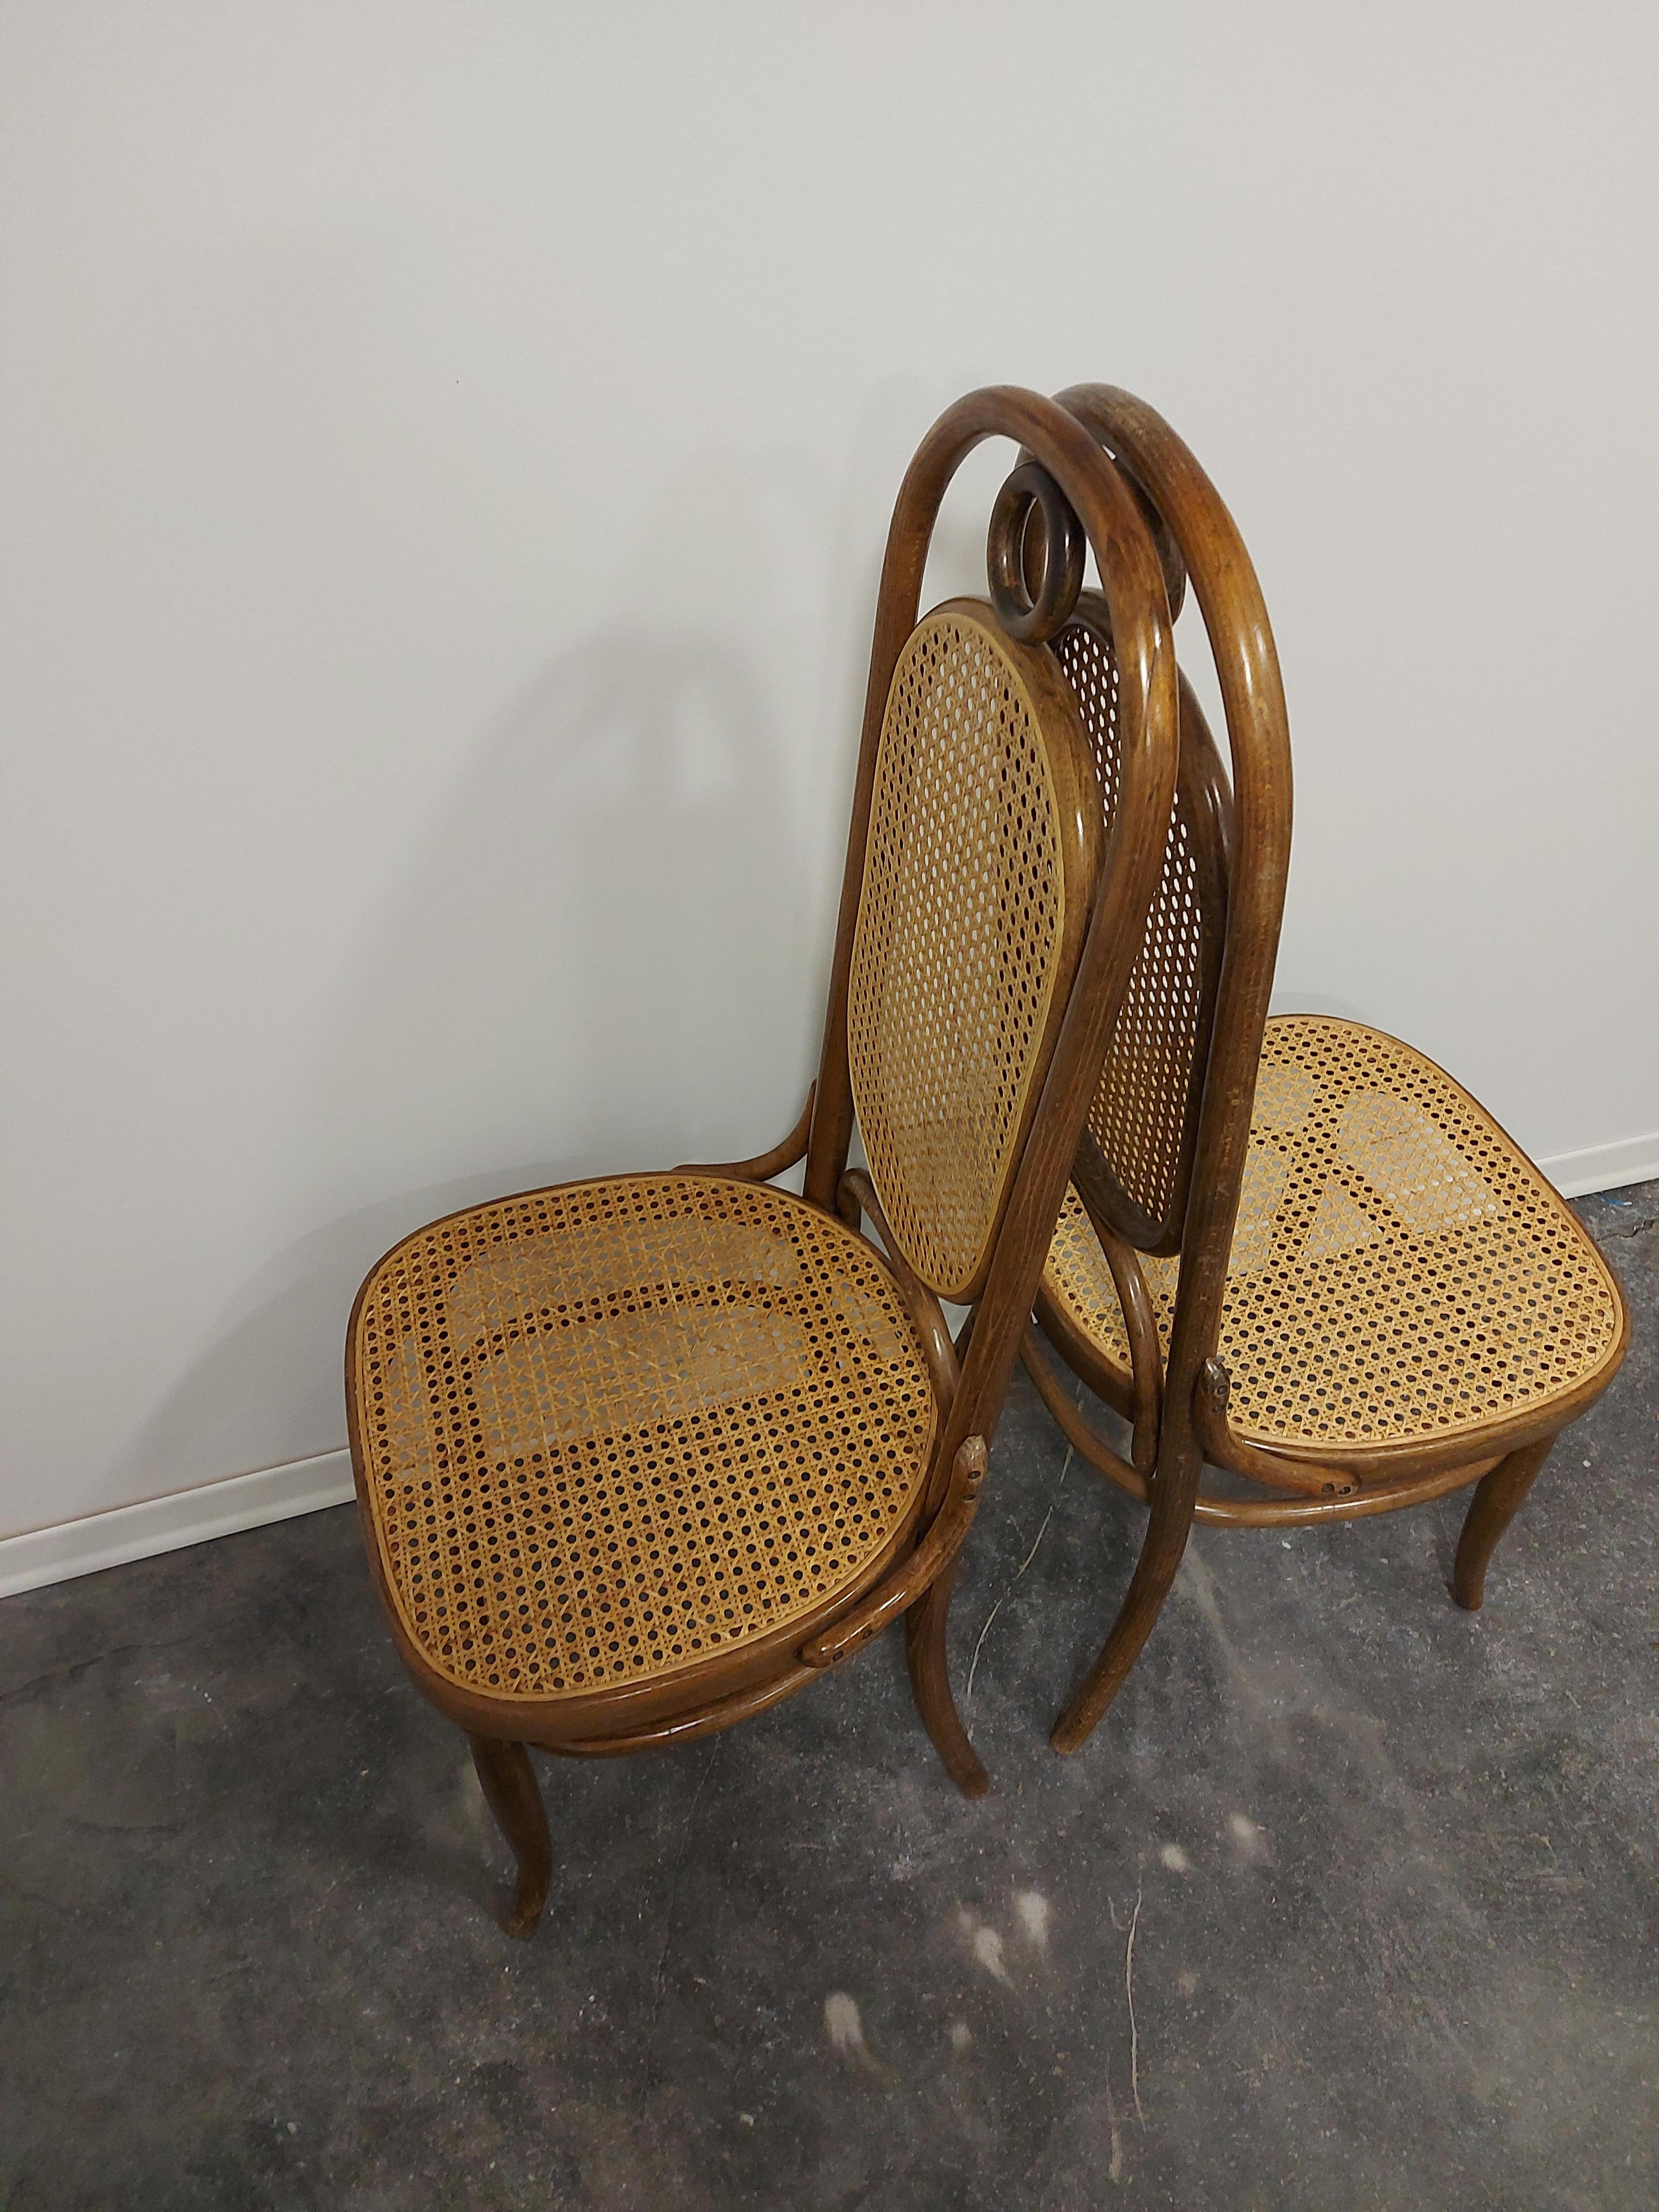 Dining Chairs, Bentwood, M 17, High Back, 1 of 6 For Sale 3